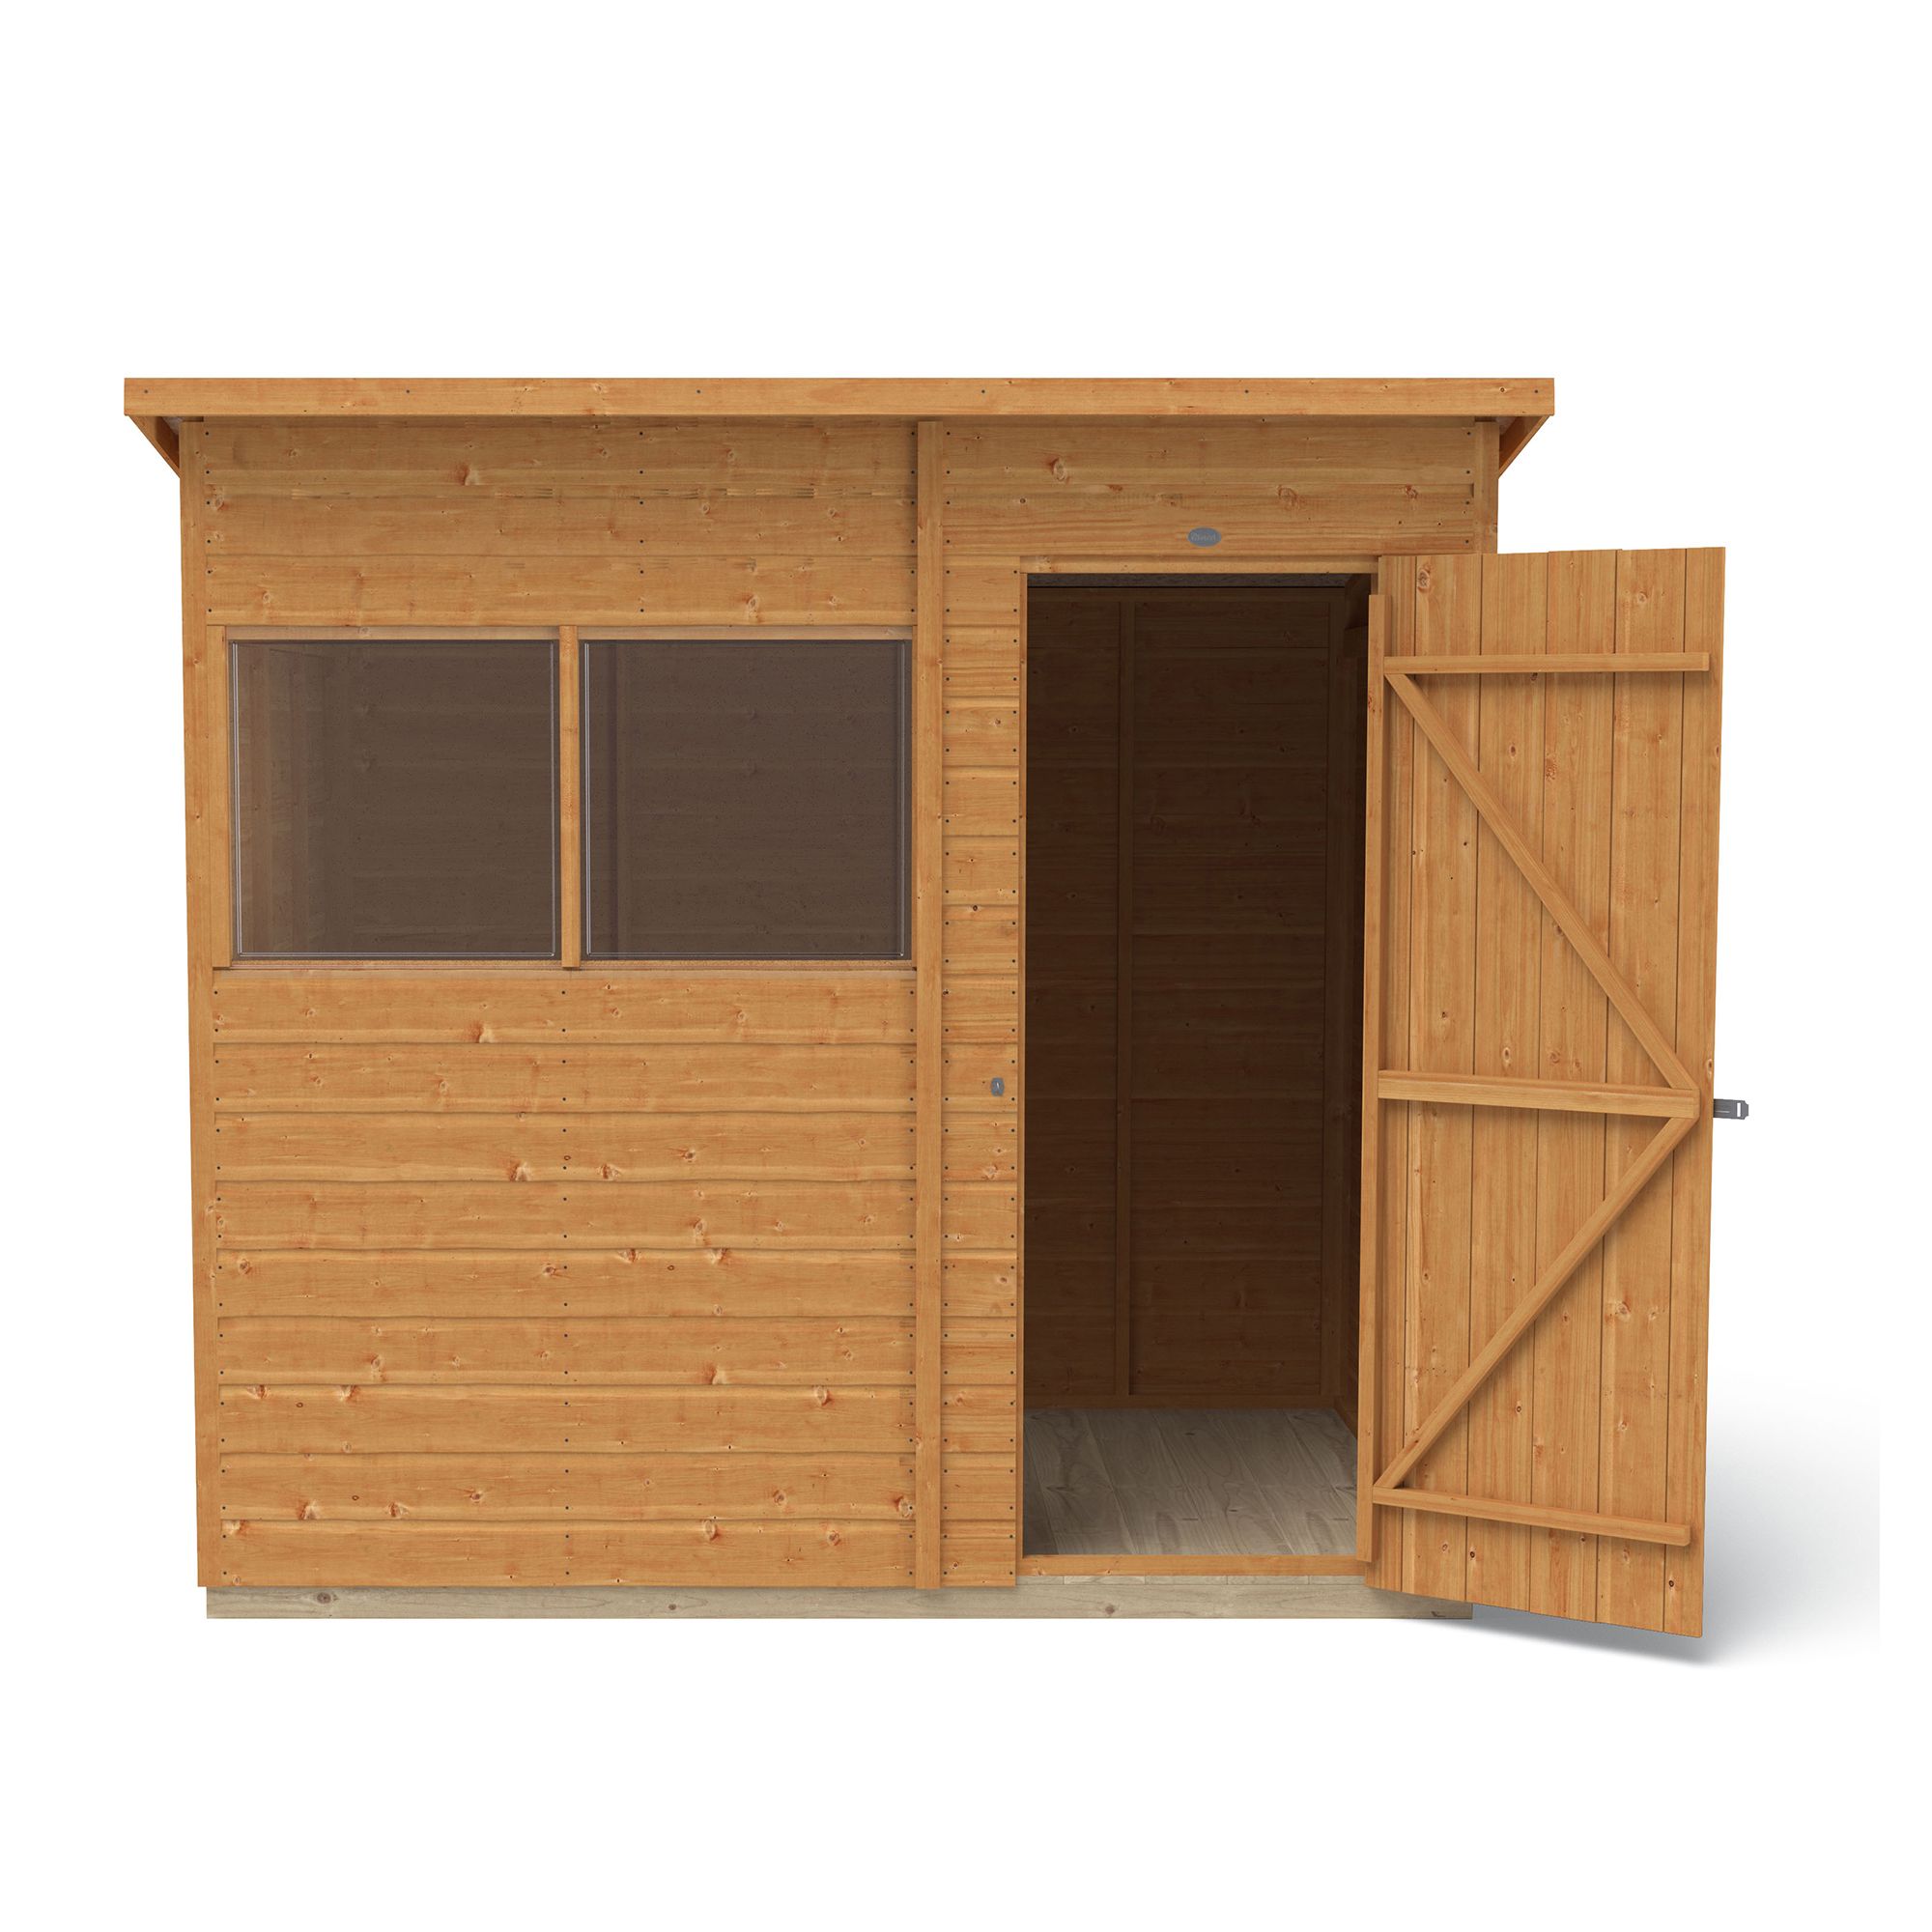 Forest Garden Shiplap 7x5 ft Pent Wooden Shed with floor & 2 windows (Base included)